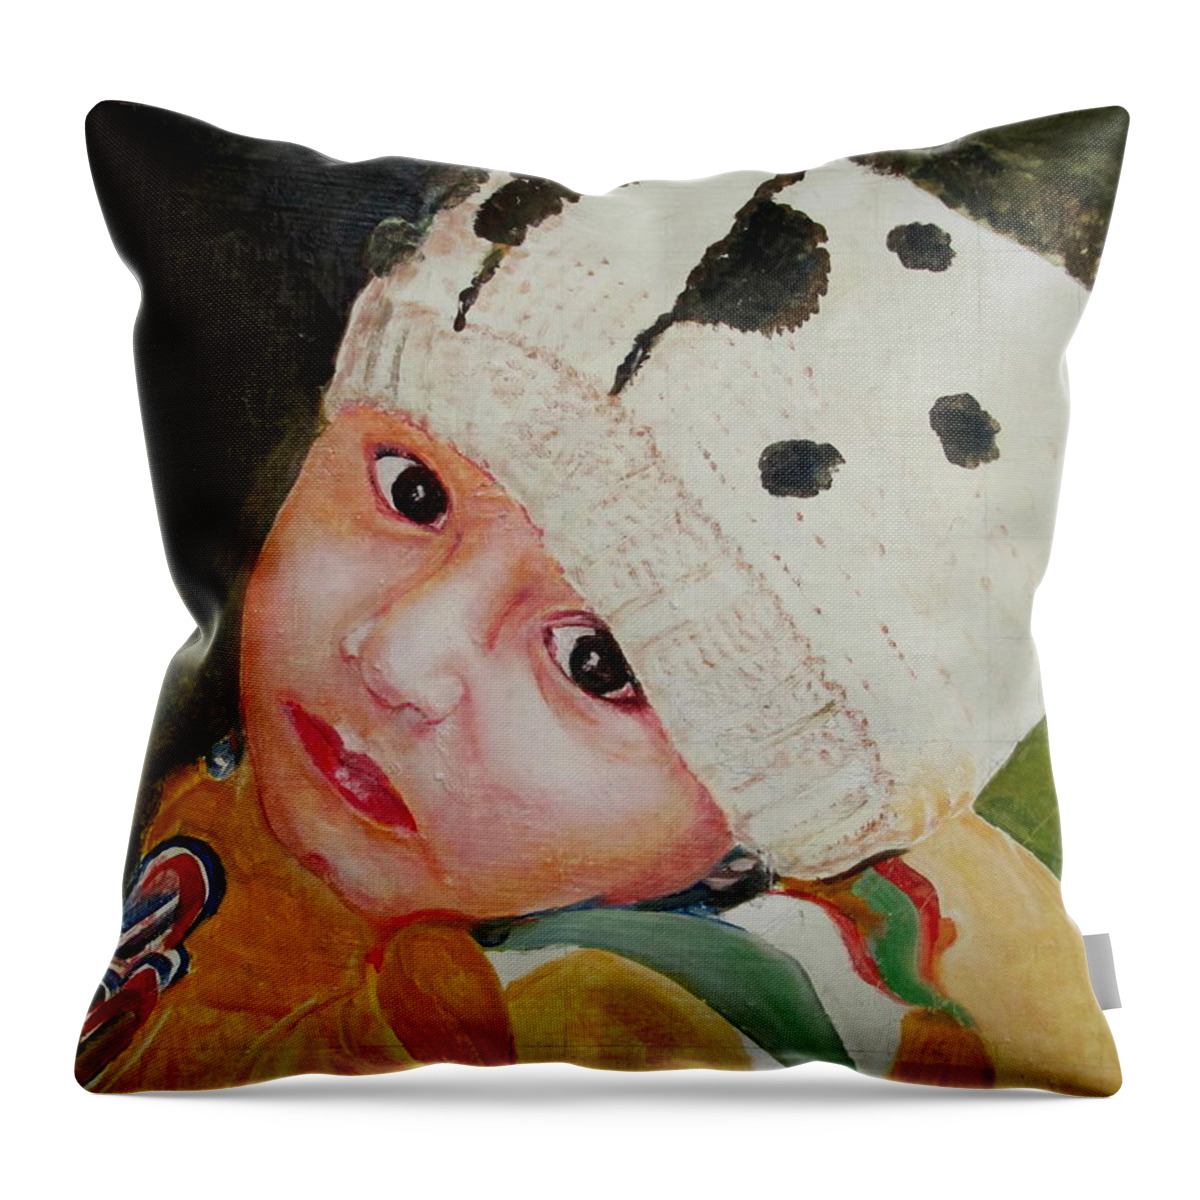 Boy Throw Pillow featuring the painting Shameer by Khalid Saeed